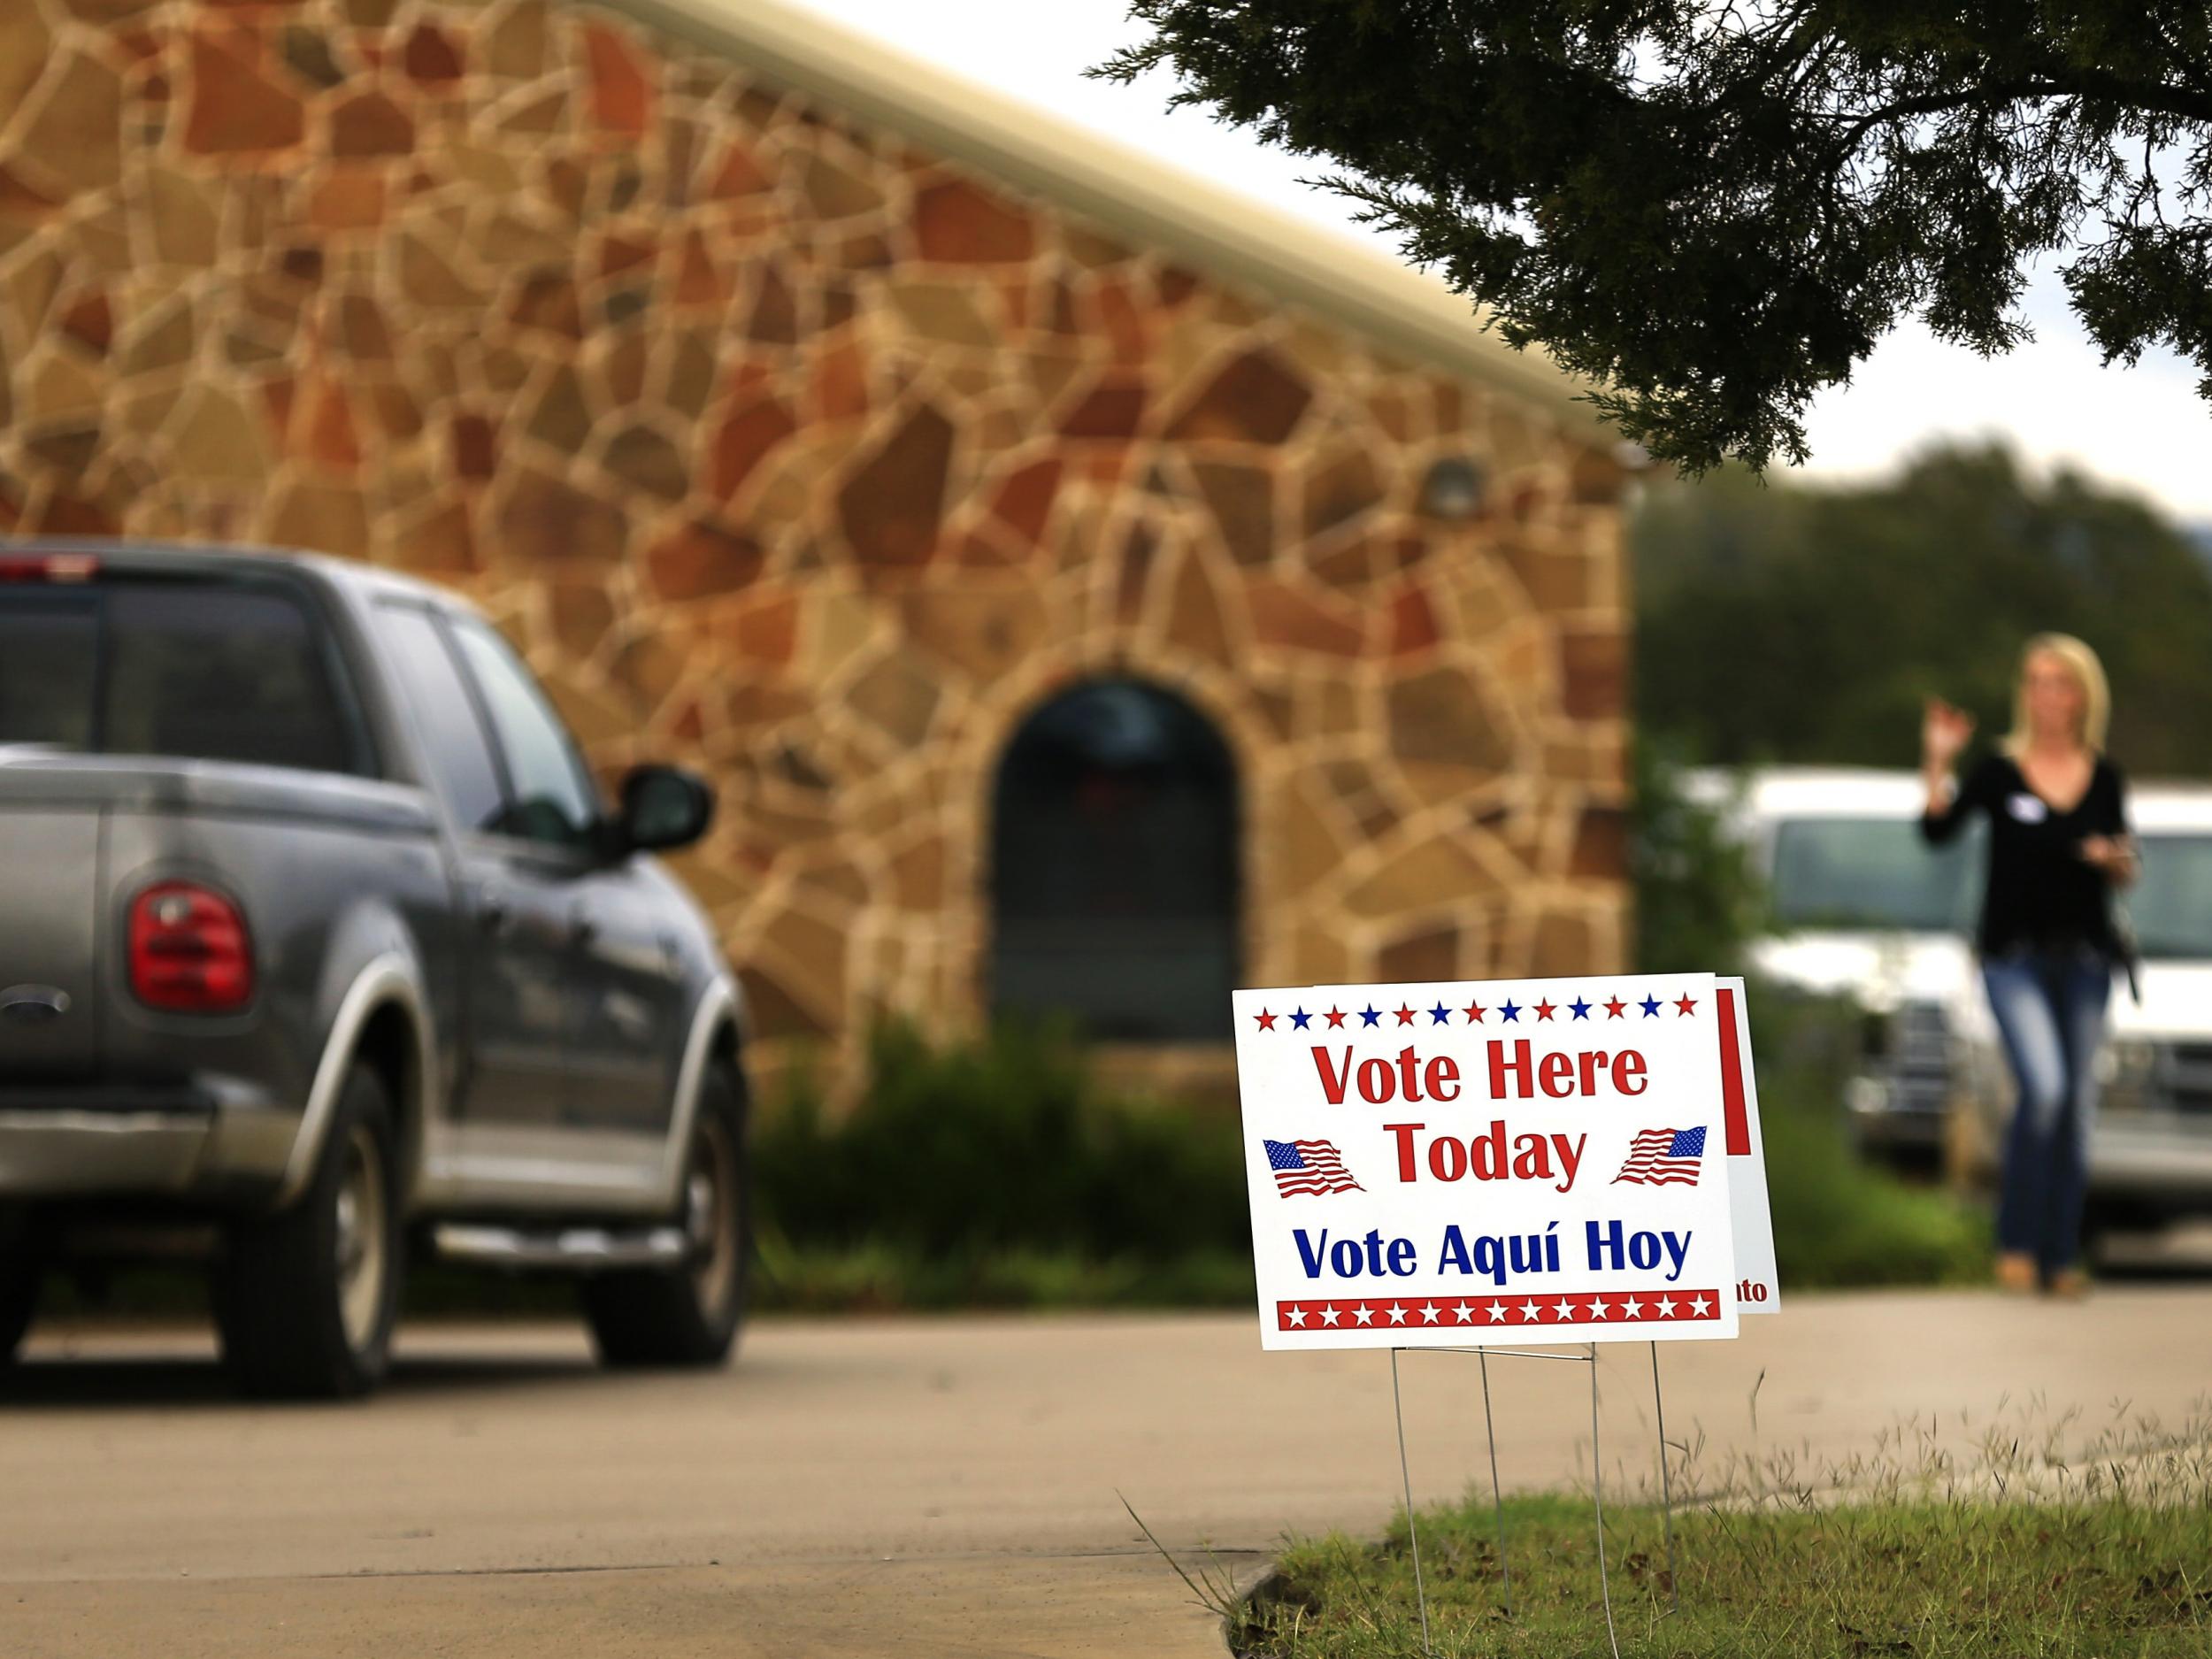 Voters arrive at a polling station in Brock, Texas, to cast their ballots in the November 2016 presidential election